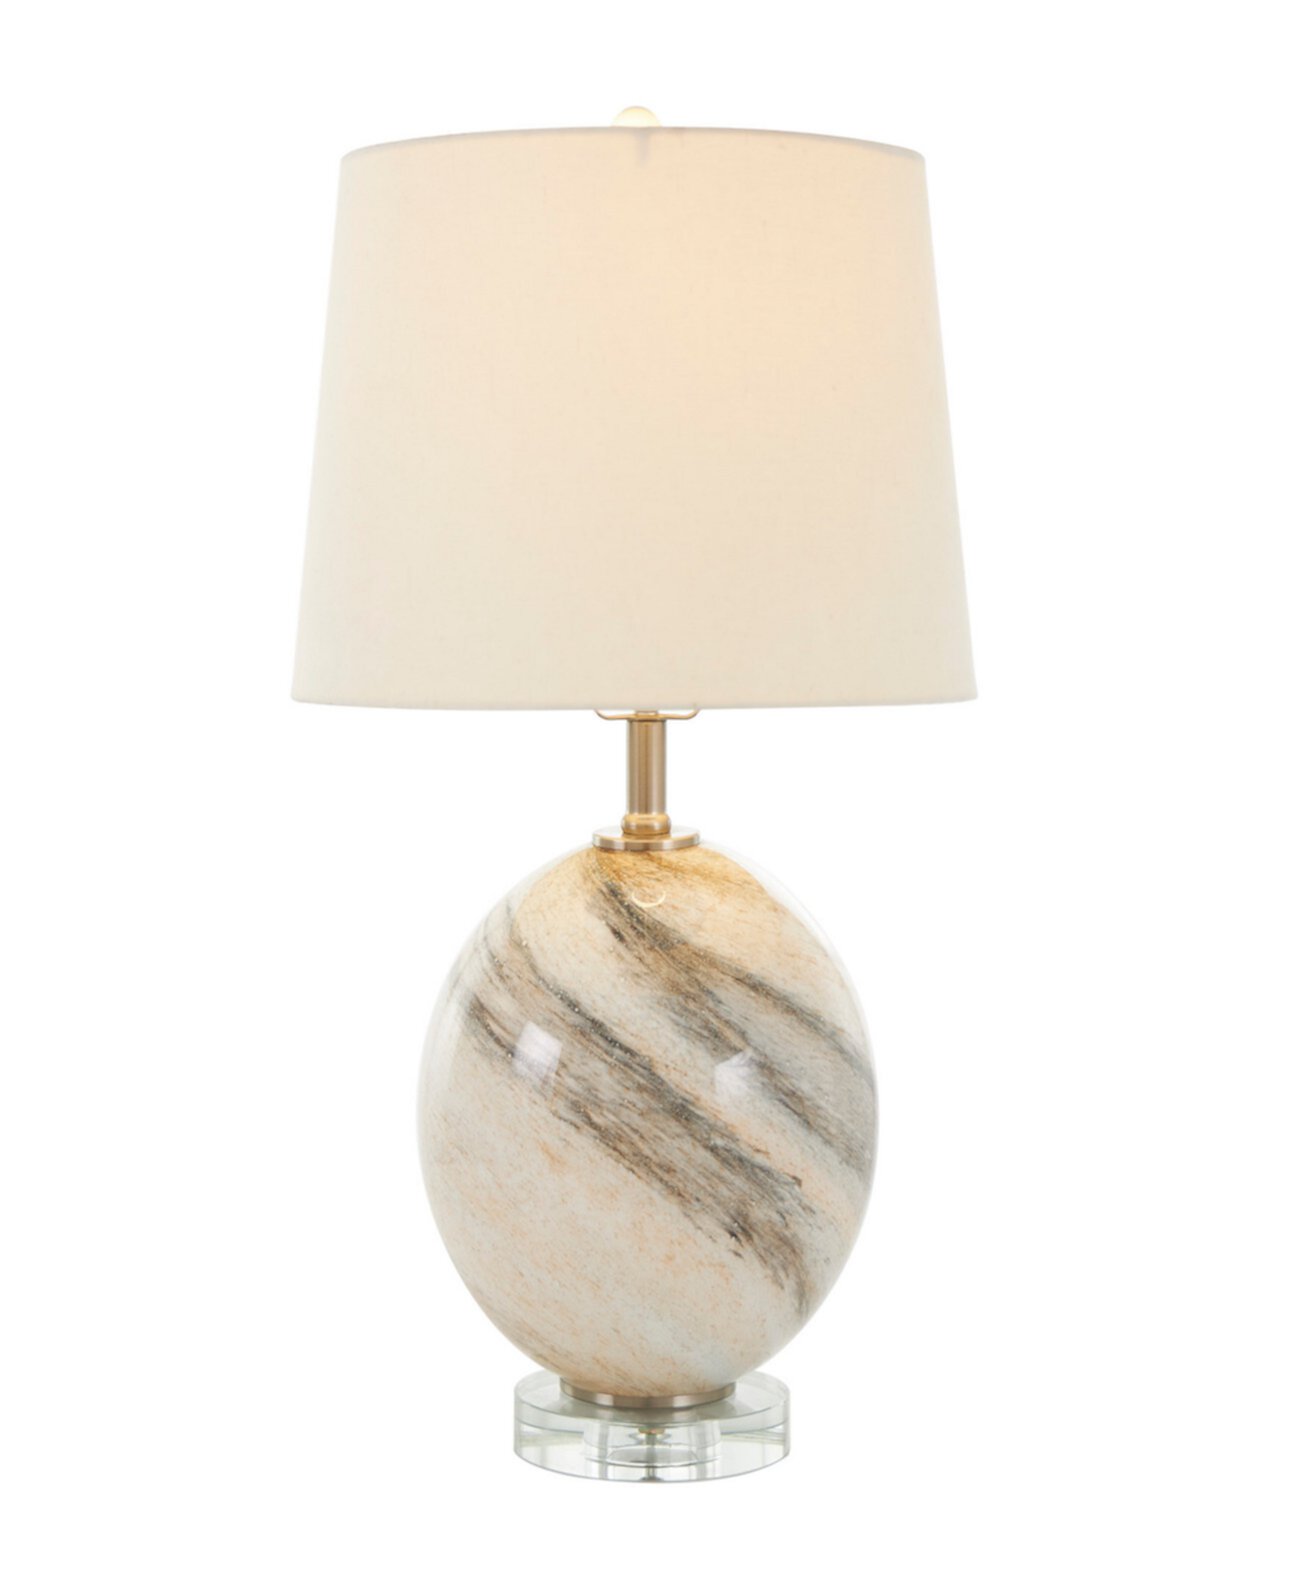 23" Glass Round Accent Lamp with Marble Inspired Design Rosemary Lane